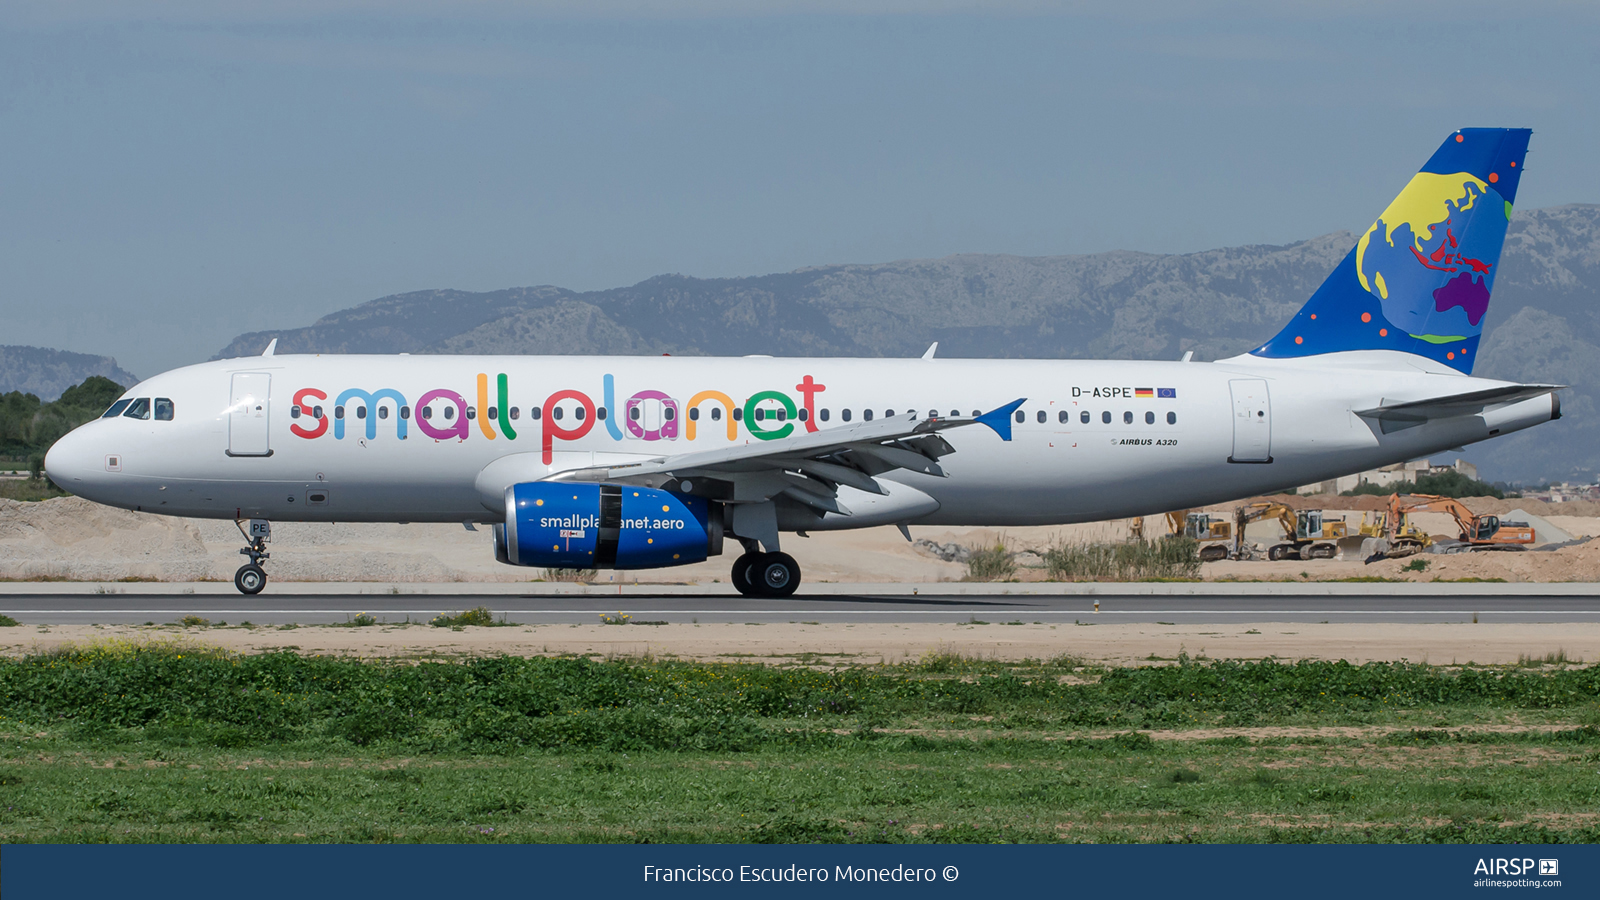 Small Planet Airlines  Airbus A320  D-ASPE